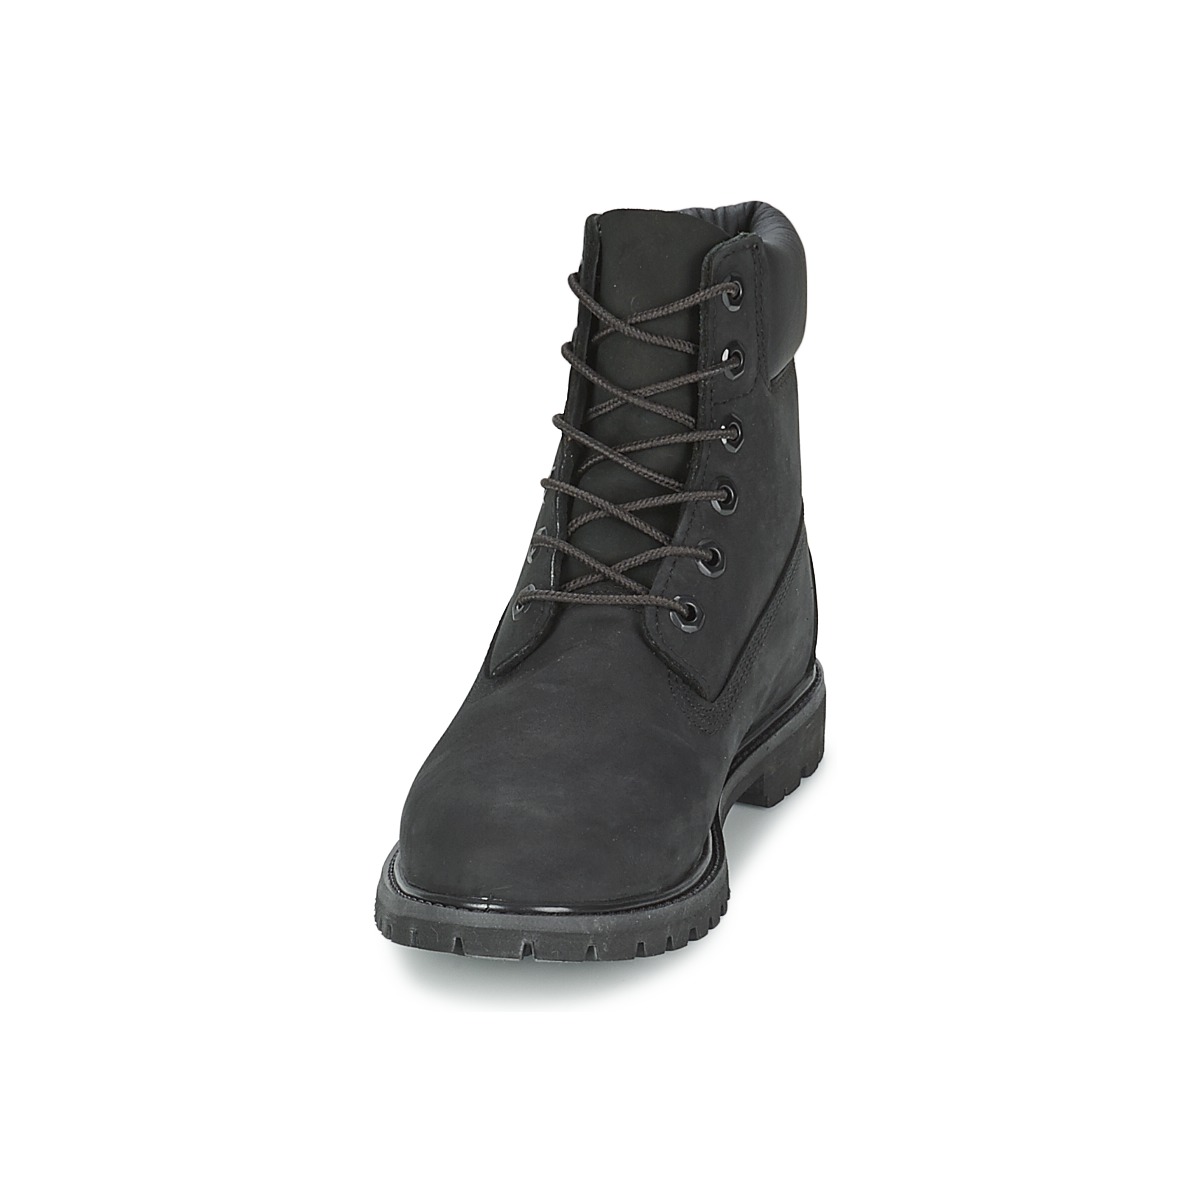 Timberland Noir 6IN PREMIUM BOOT - W vhkSeJy8